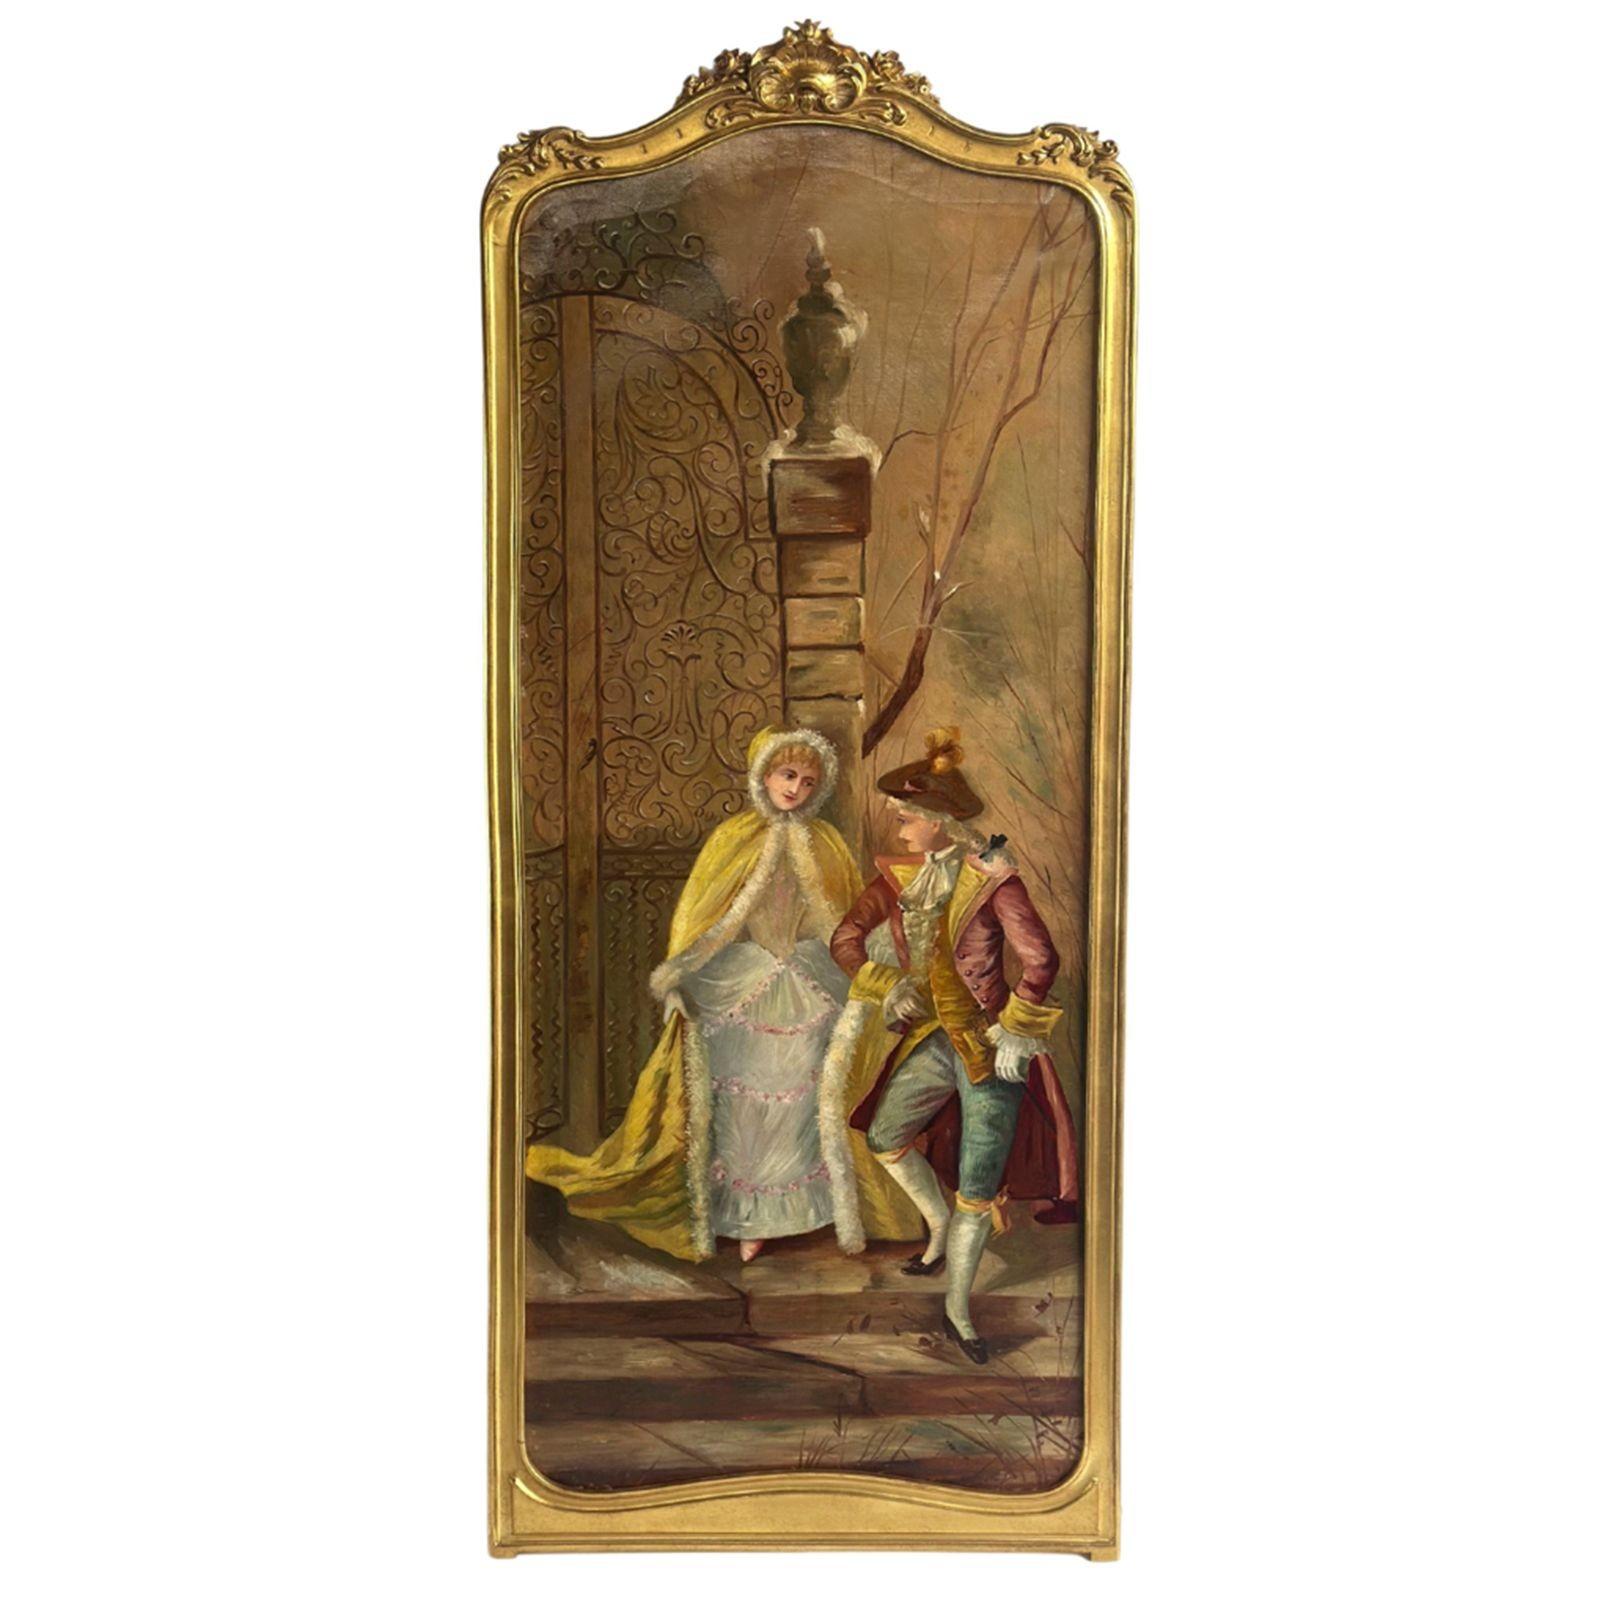 Elegant pair of tall oil on canvas paintings each depicting a romantic scene of lovers, both wearing traditional attire. The first painting depicts a couple gracefully descending a staircase, while the second showcases a young man playing the flute